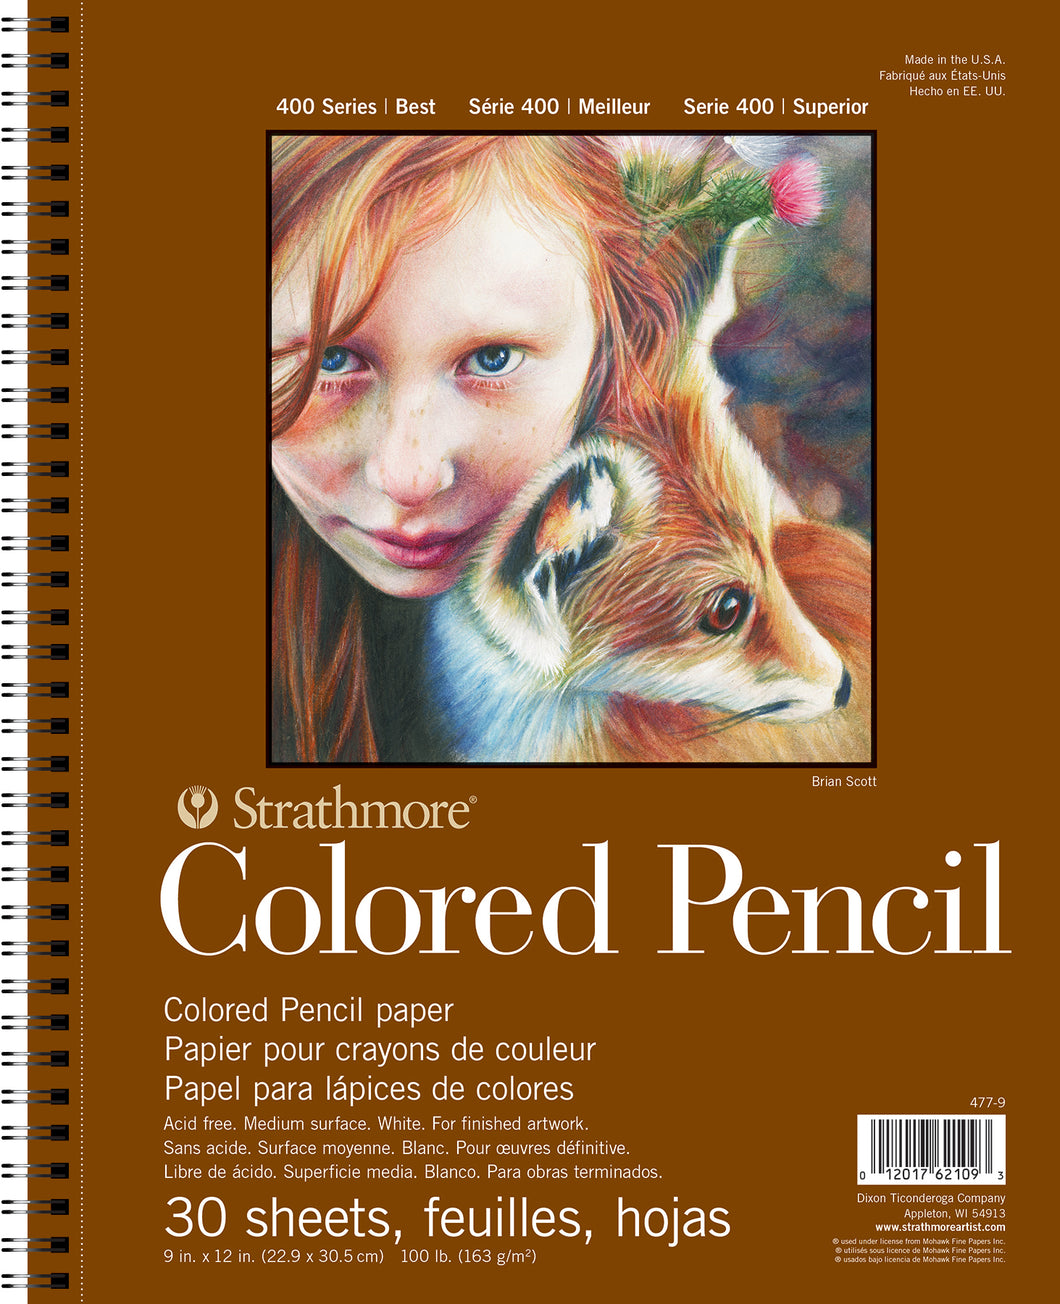 Strathmore Colored Pencil Pad, 400 Series, 30 Sheets